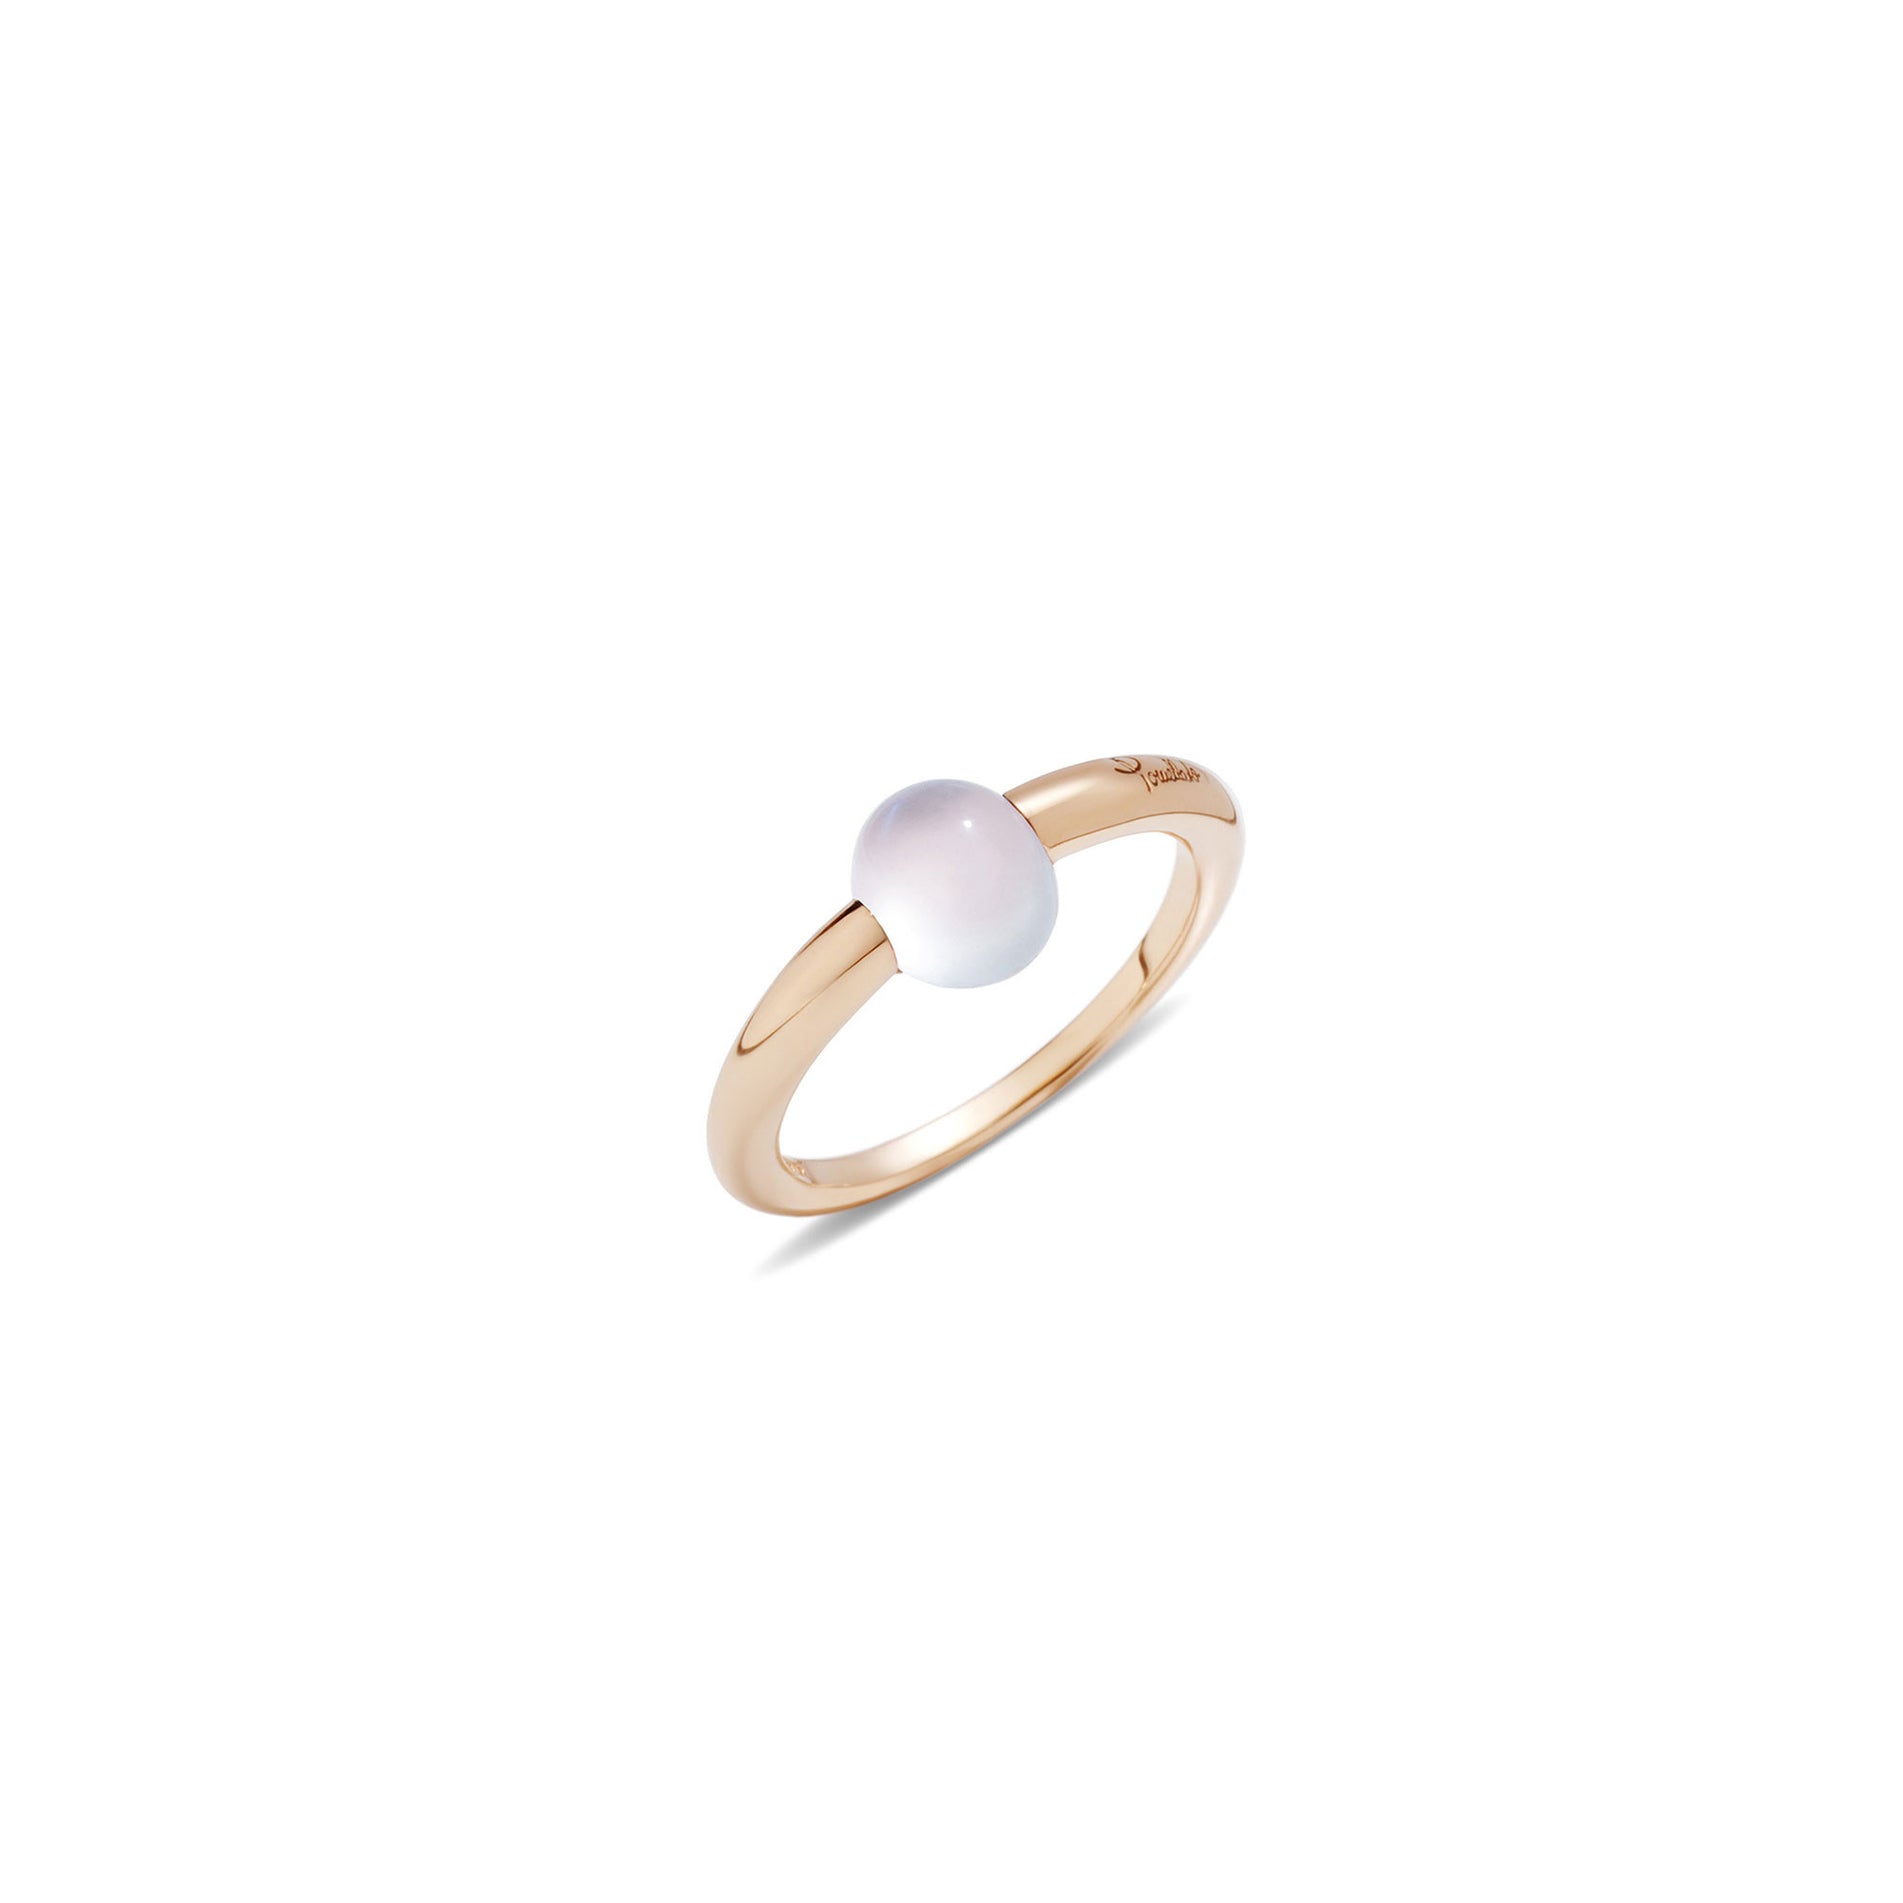 M'ama non M'ama Ring in 18k Rose Gold with Moonstone - Orsini Jewellers NZ